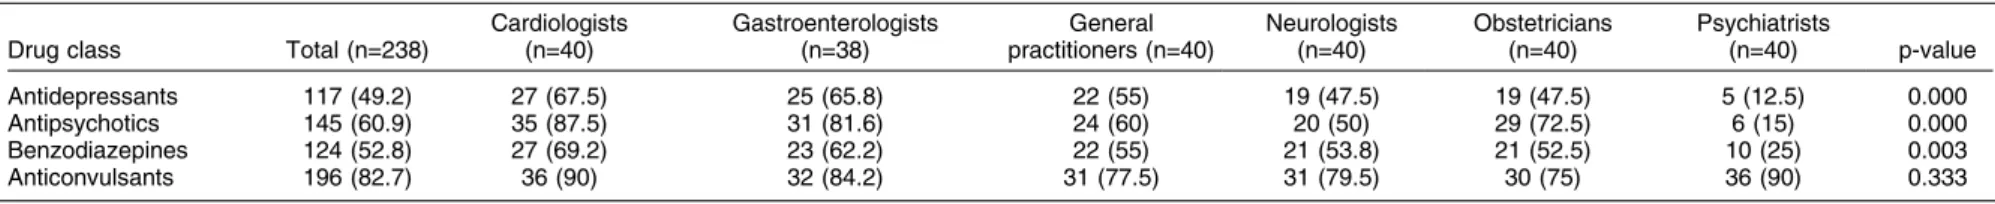 Table 2 Perception of risk regarding whether psychotropic drugs are likely to cause malformations at a frequency higher than 5%